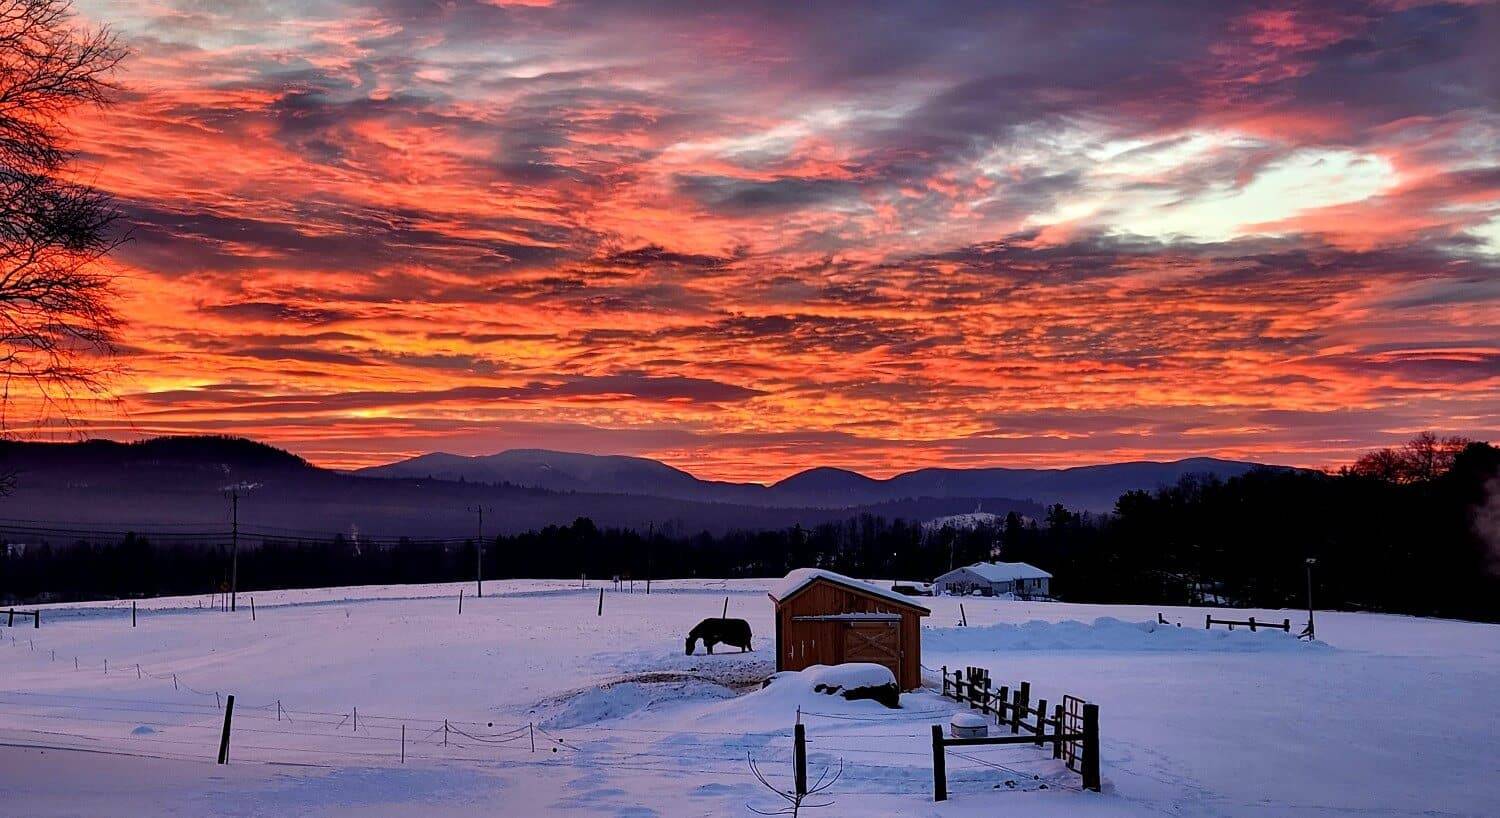 Dramatic sunrise with orange clouds, purple mountains and a horse next to a shed in the snow.